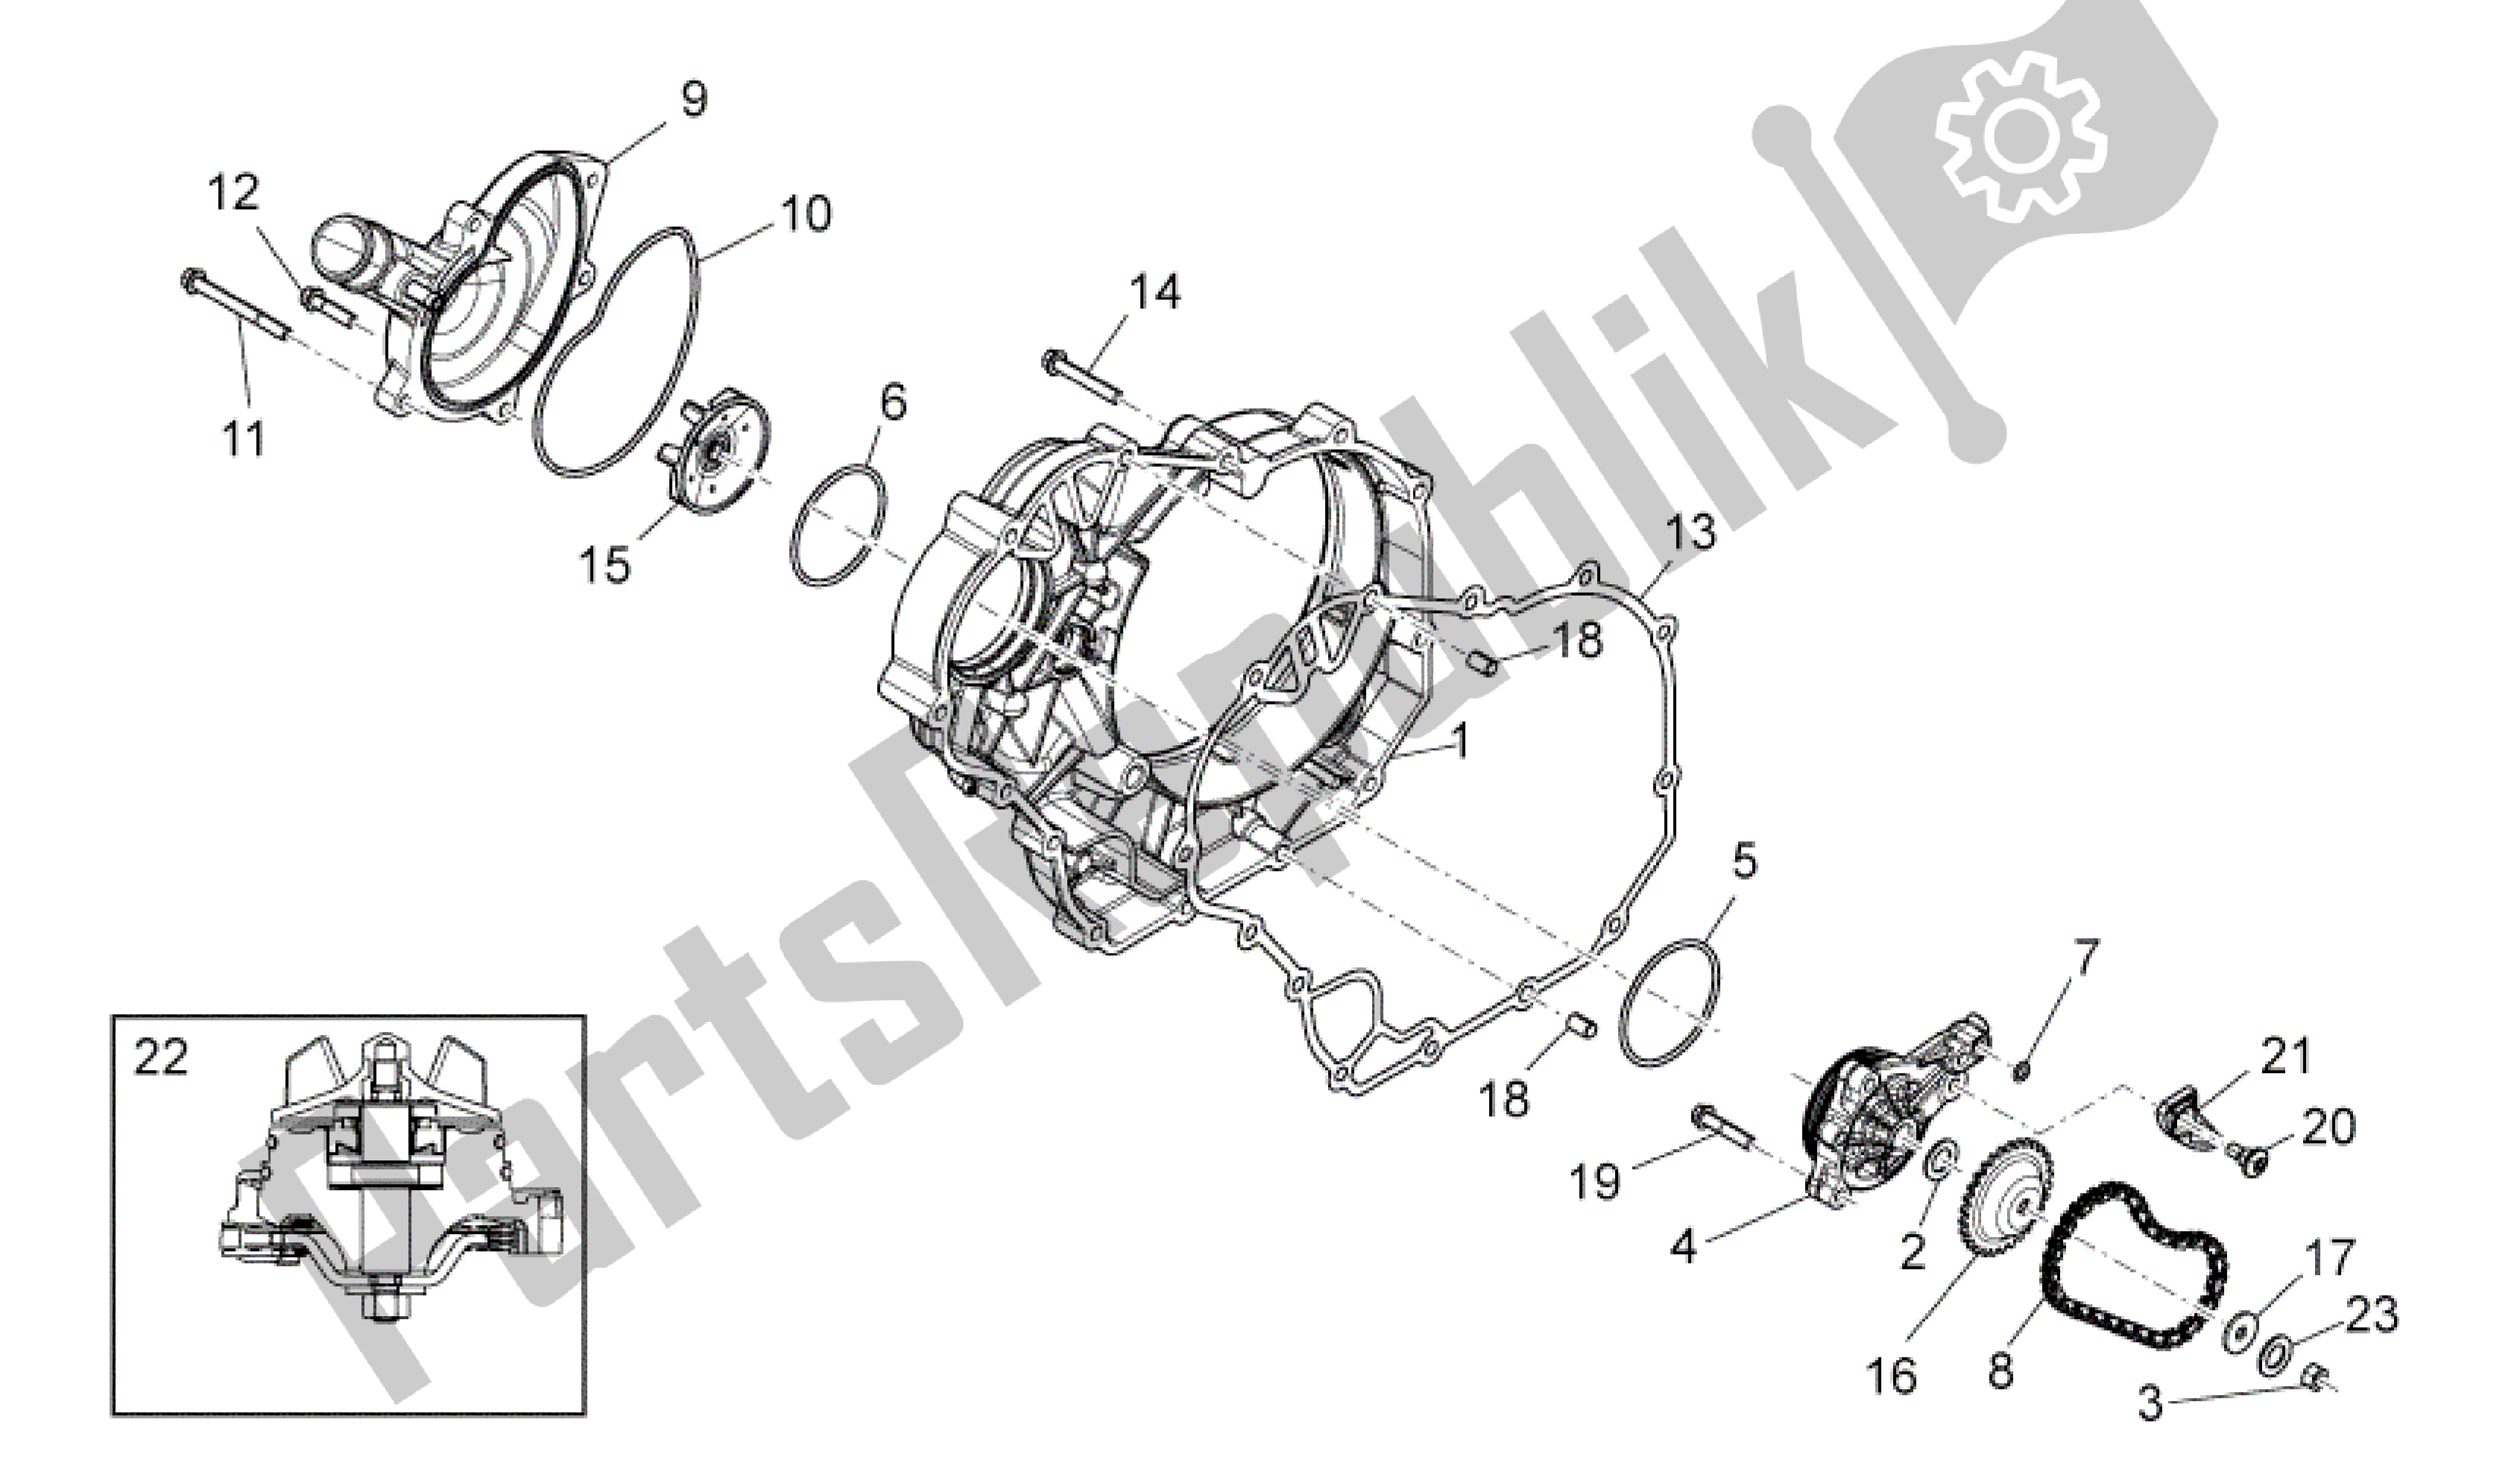 All parts for the Water Pump Ii of the Aprilia Shiver 750 2009